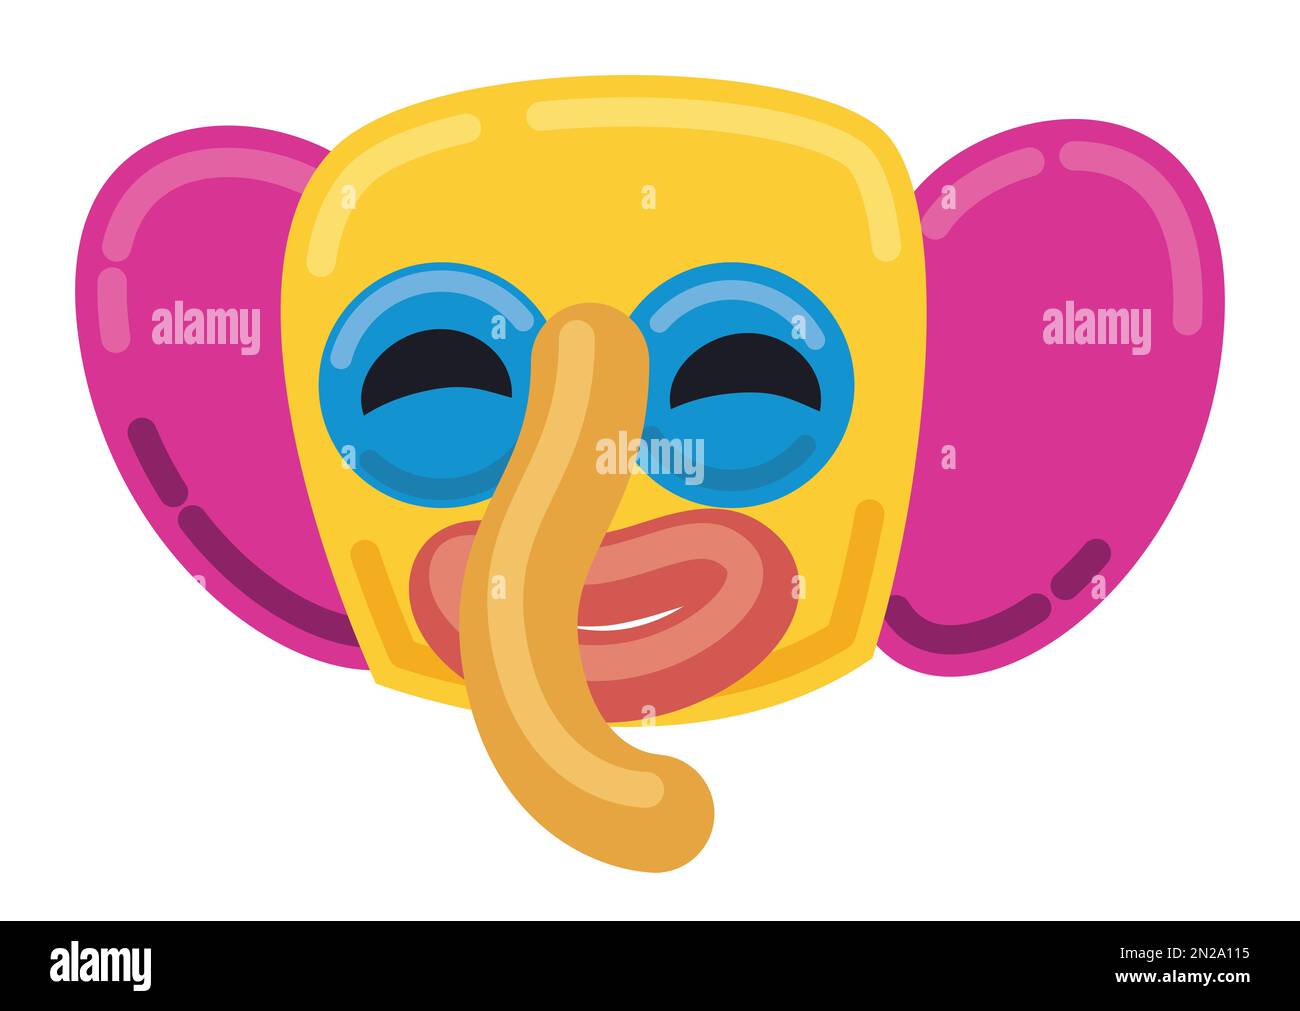 Marimonda mask with happy gesture and colorful fabrics. Design in flat style and outlines for shadows effect. Stock Vector